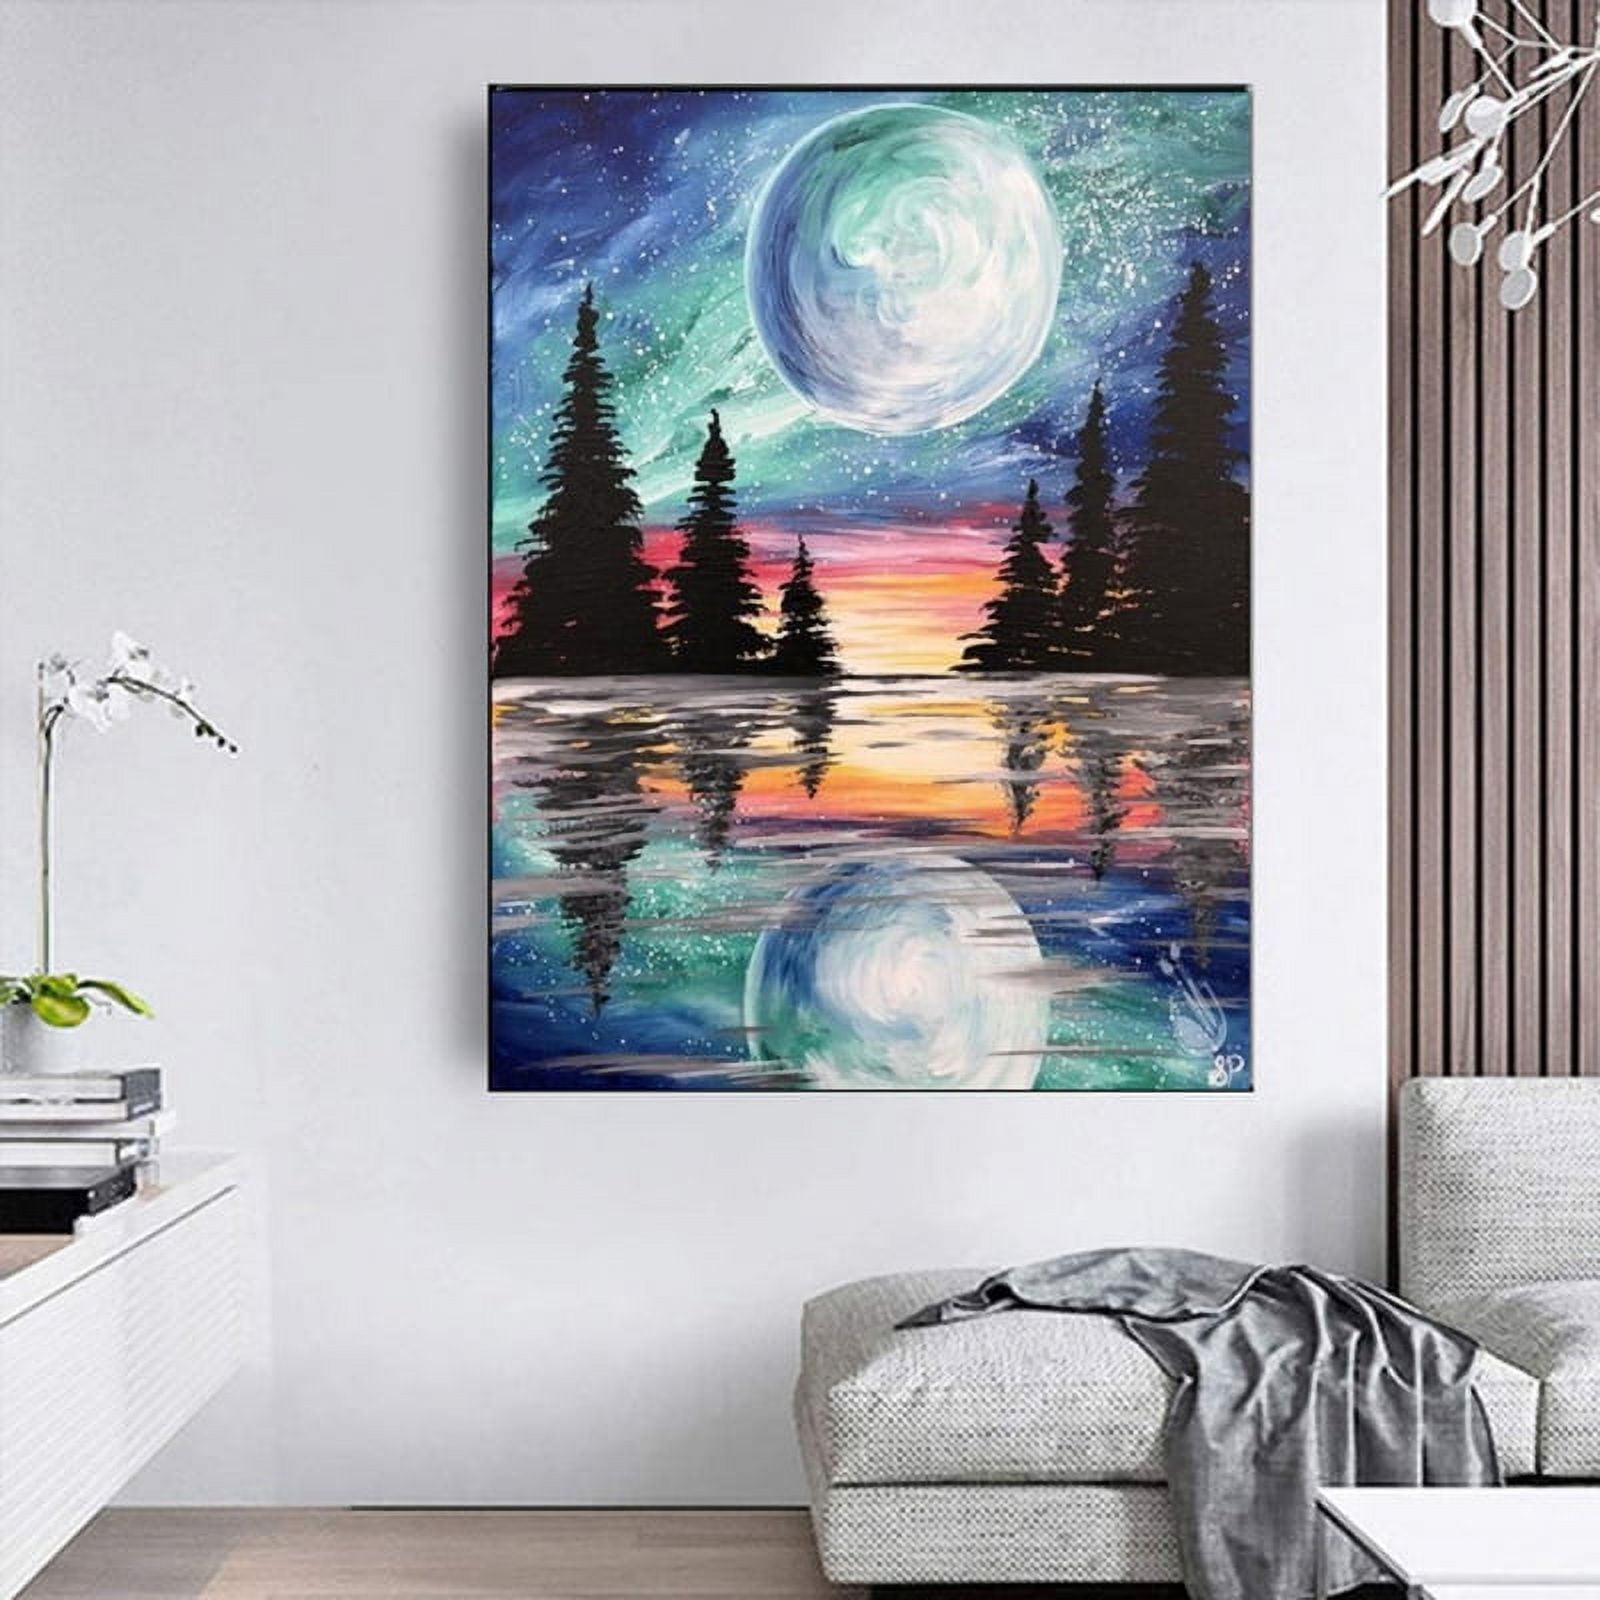 5D Diamond Painting Kits for Adults, Diamond Art Dotz Dots Kits for Adults,  Paint with Diamonds Full Drill Round Gem Art Painting Kit for Home Wall  Decoration (Full Moon on the Lake 